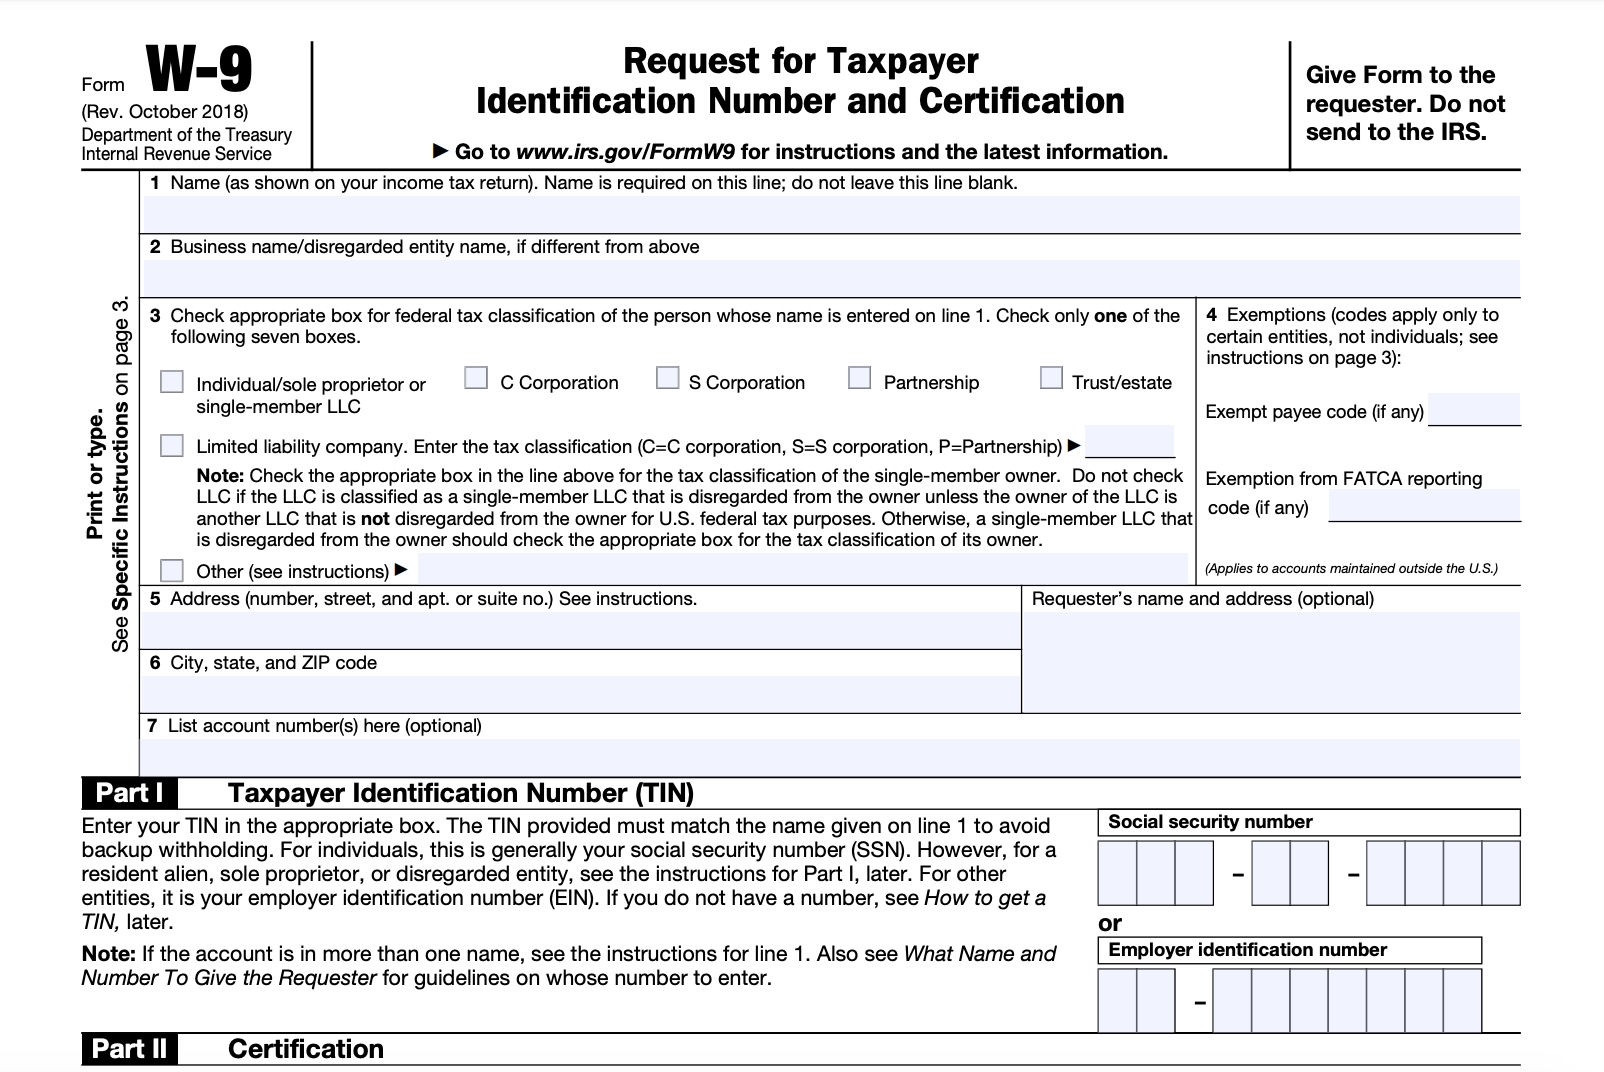 W-9 Form - Fill Out The Irs W-9 Form Online For 2019 | Smallpdf-2021 W-9 Form Printable Free Irs